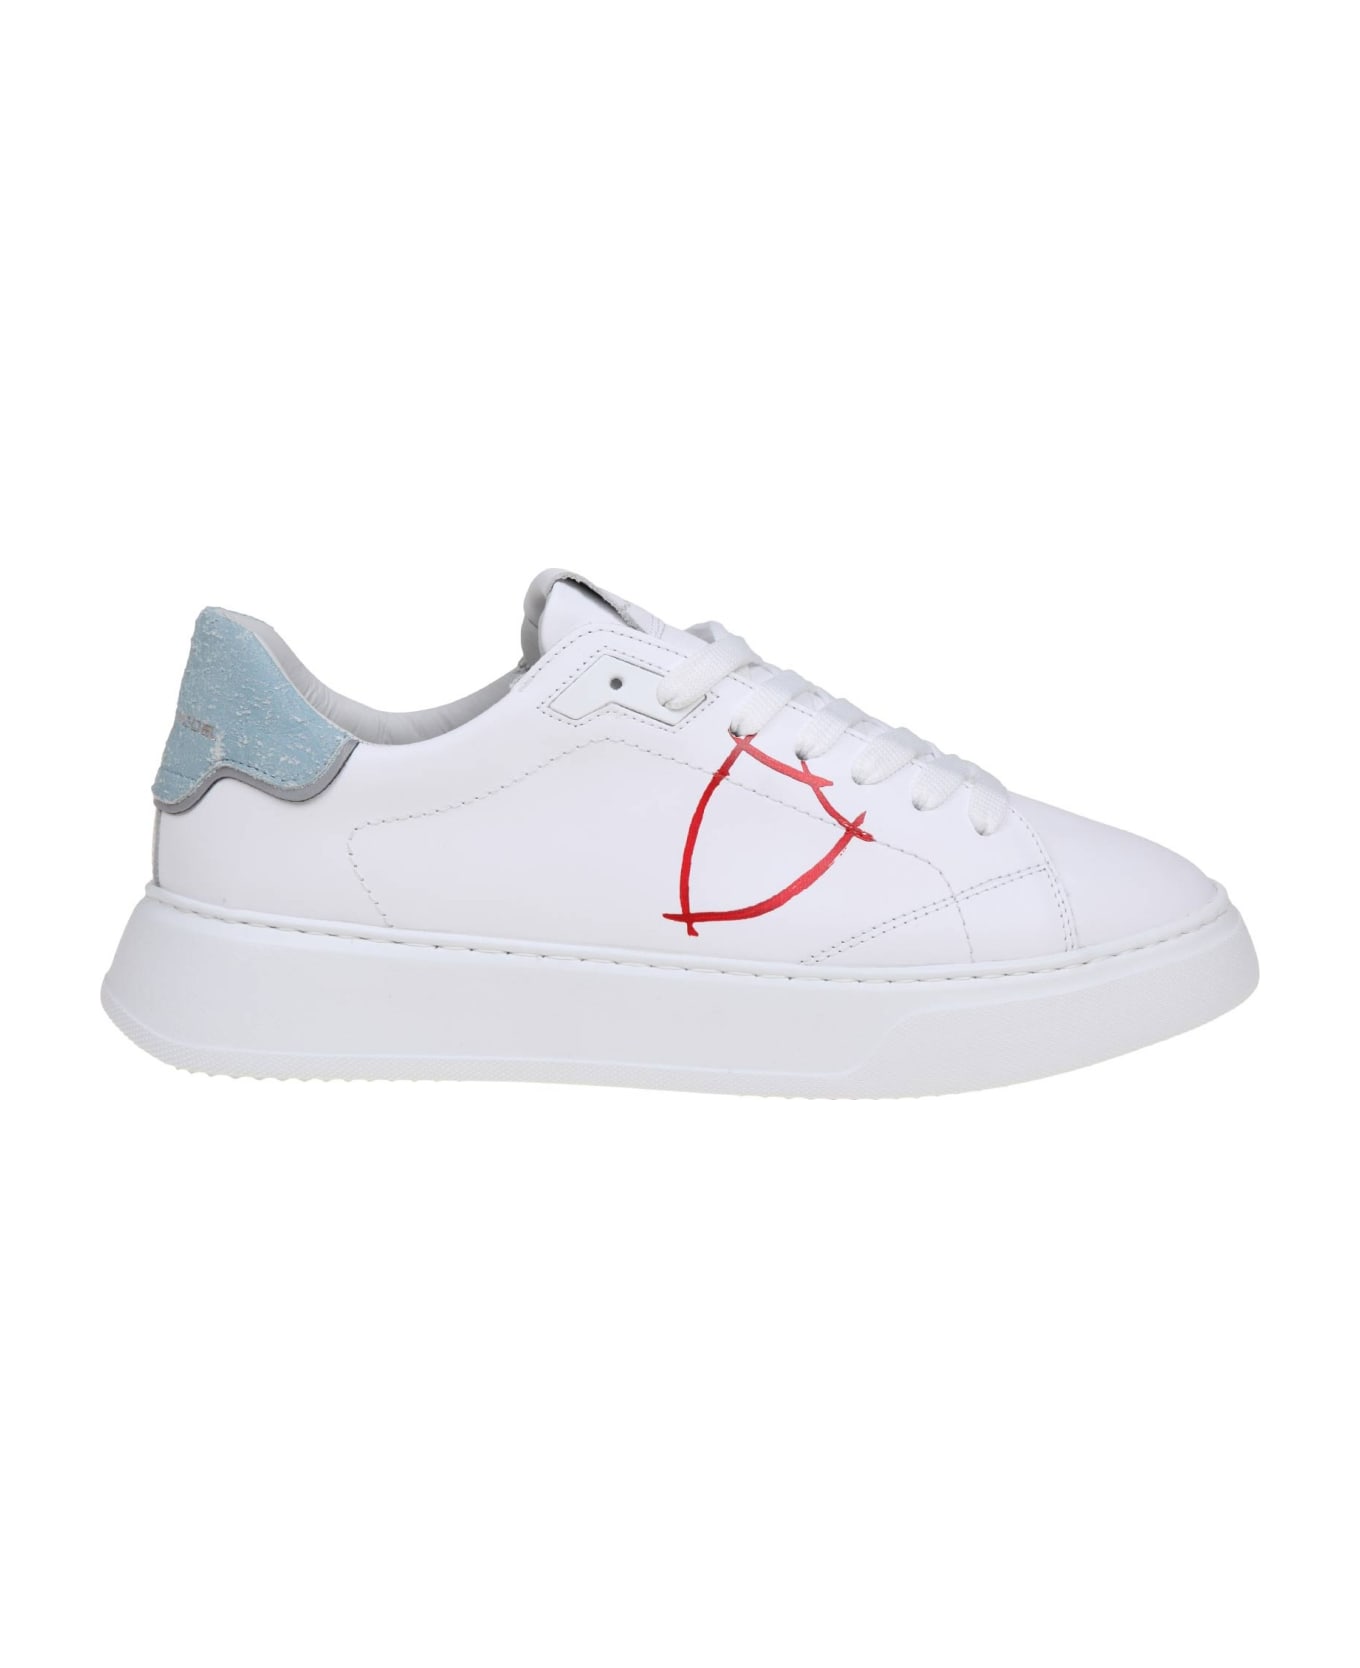 Philippe Model Temple Low Sneakers In White And Light Blue Leather - White/Red